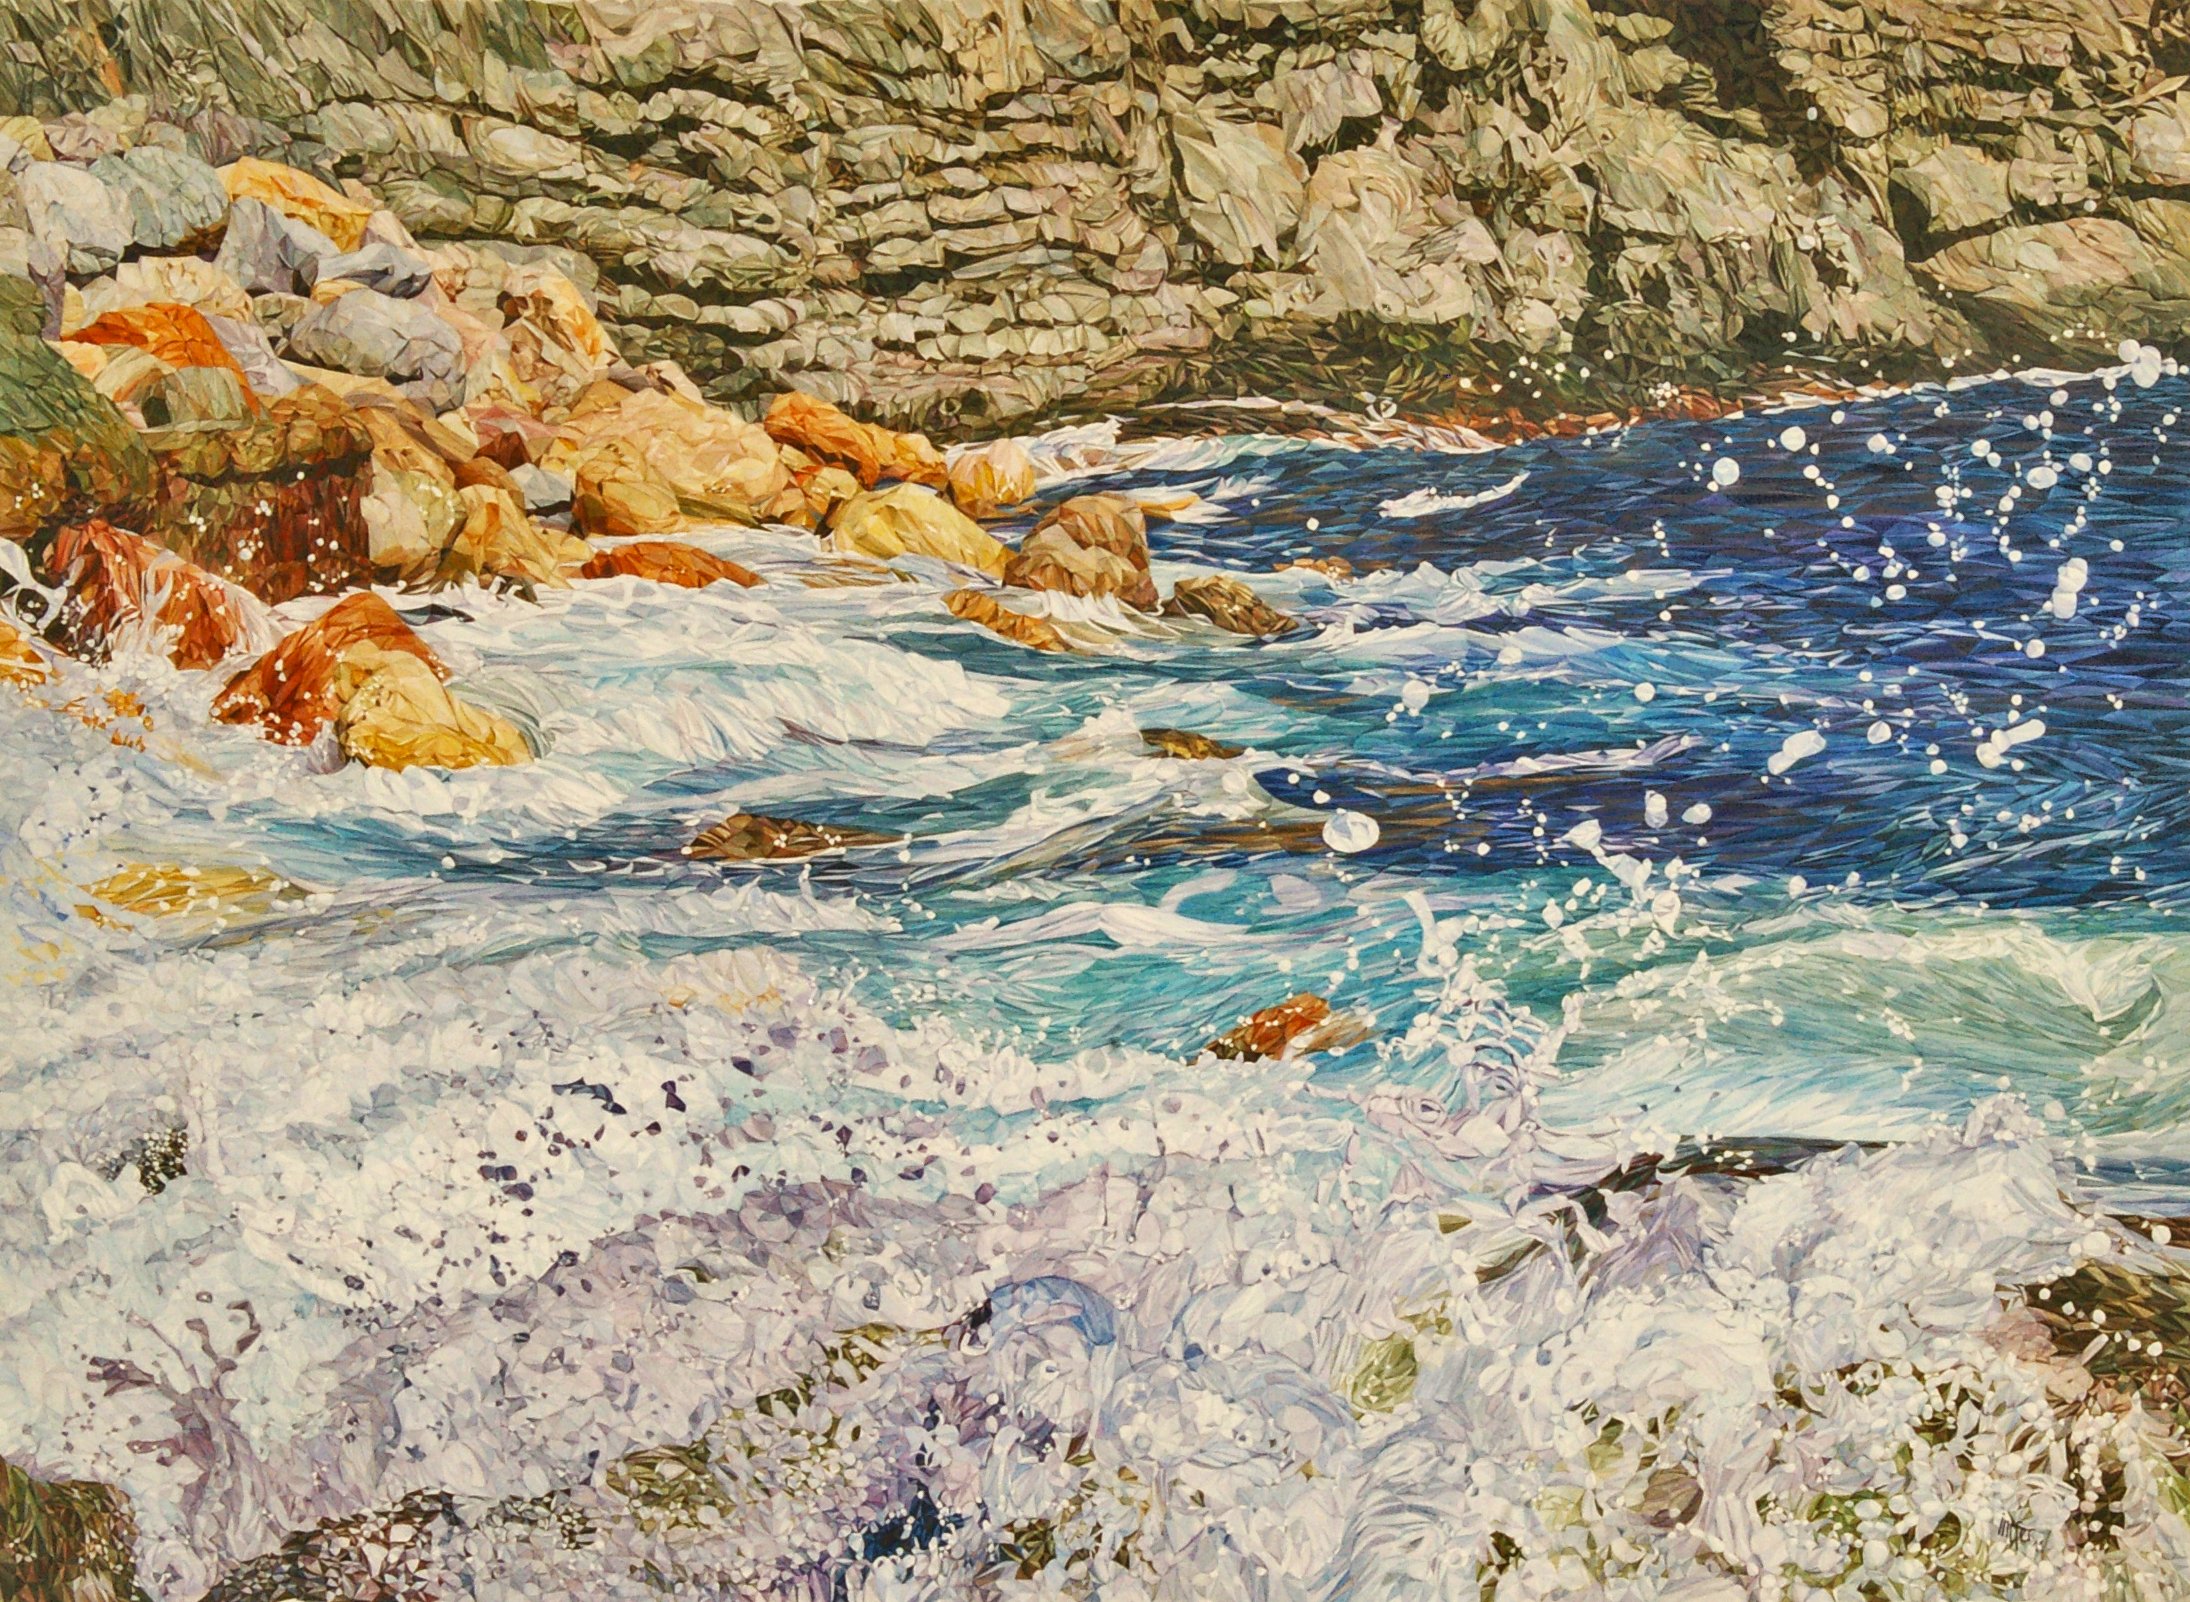 Imelda Feraille; Surf, 2011, Original Watercolor, 81 x 64 cm. Artwork description: 241  Nature elements give me inspiration. . .The wonders of the see. These is a picture of Llanca, on the coast of Costa Brava, Spain   ...